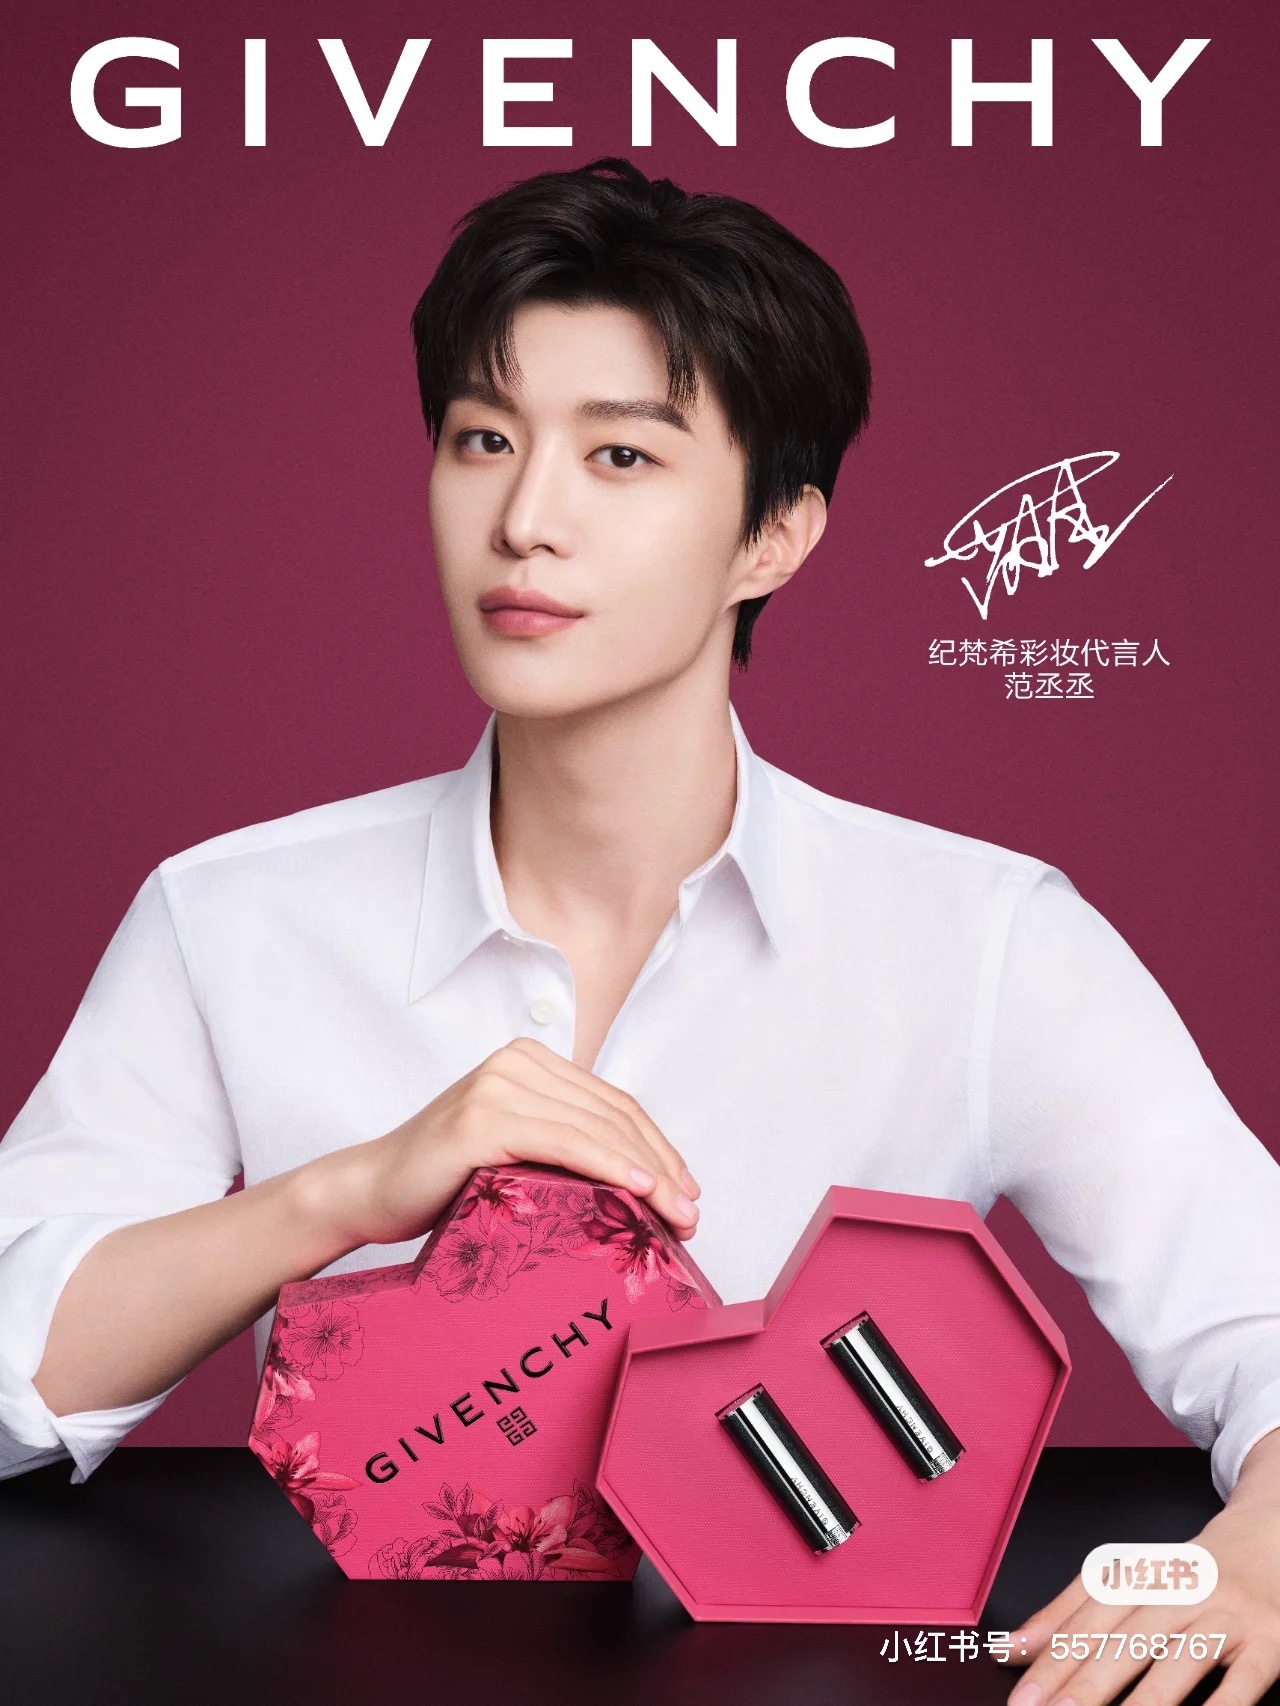 Givenchy shooting '520' limited edition gift box with Chinese idol Fan ChengCheng. Image: Givenchy Xiaohongshu